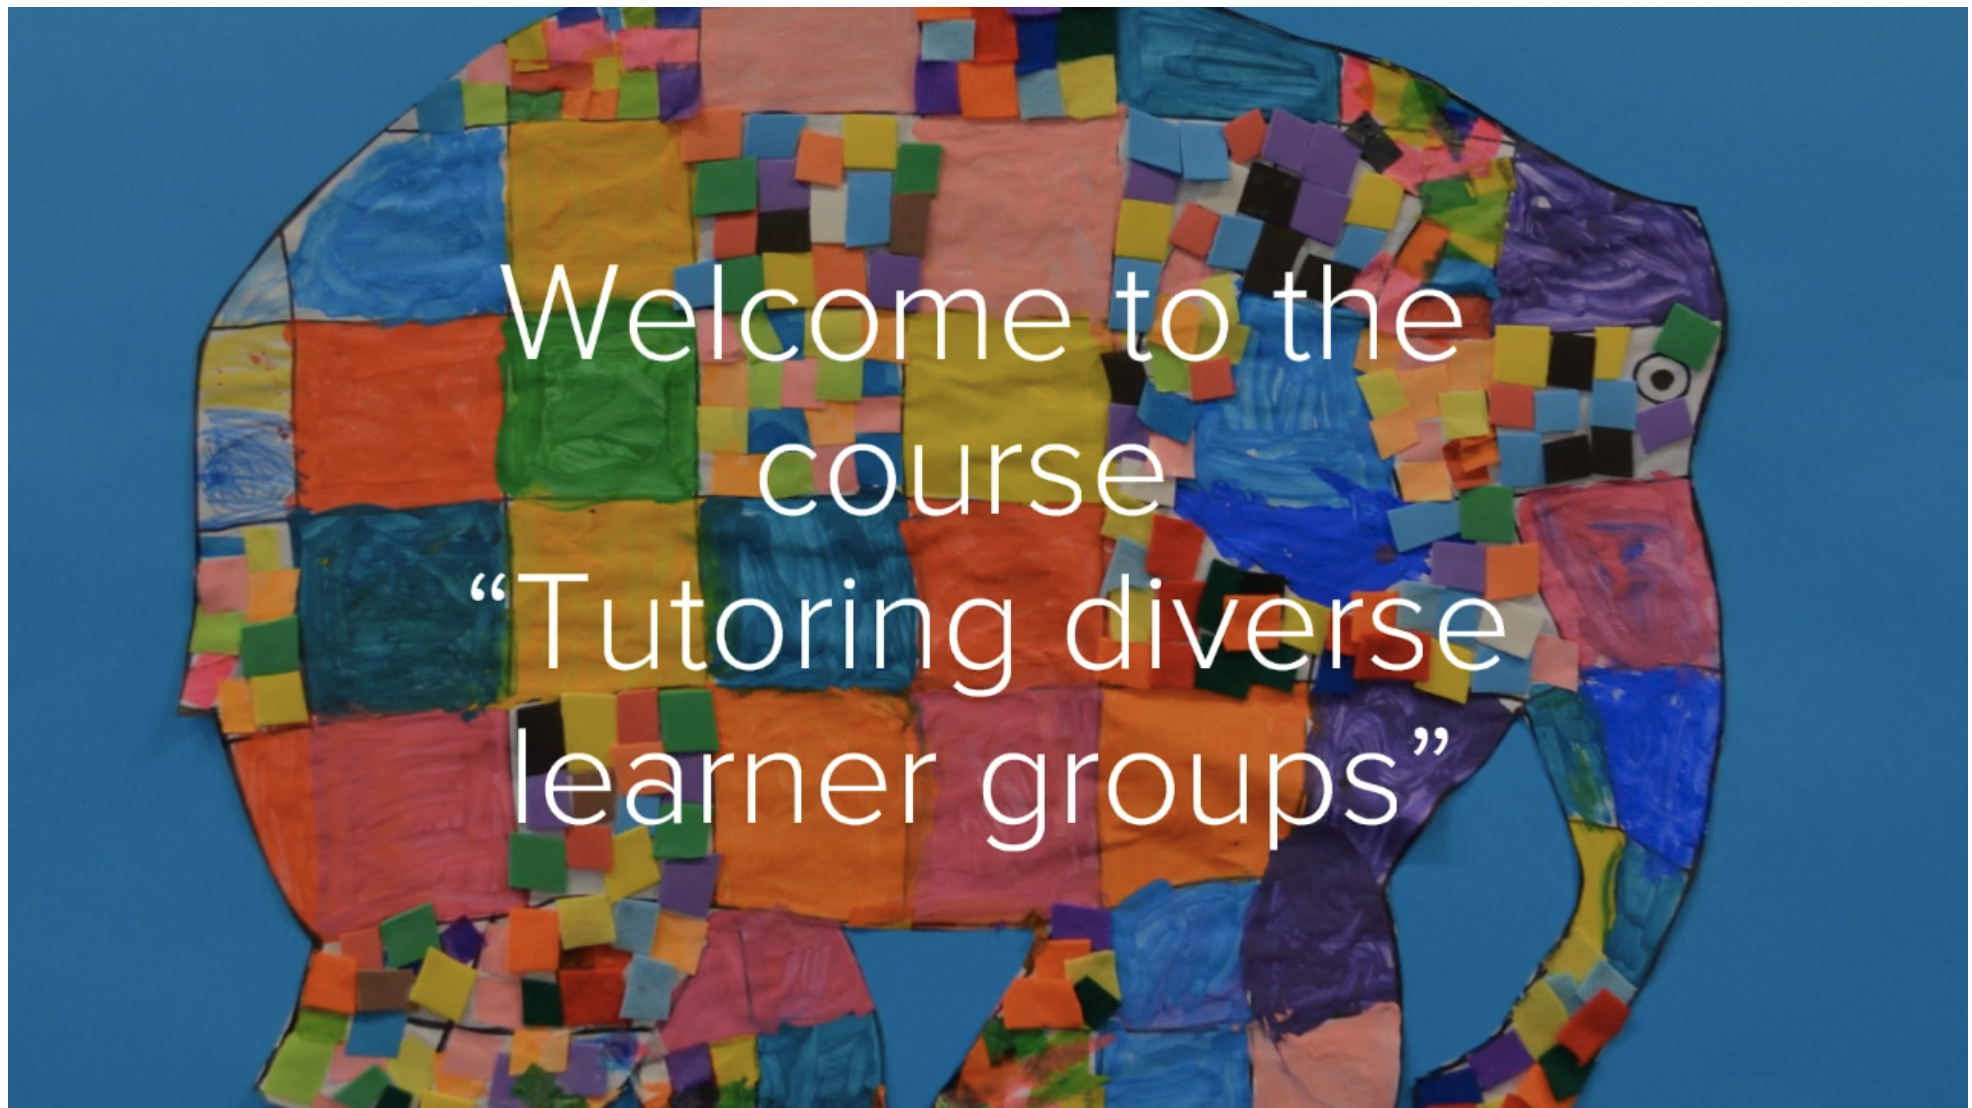 Training material on tutoring diverse learner groups